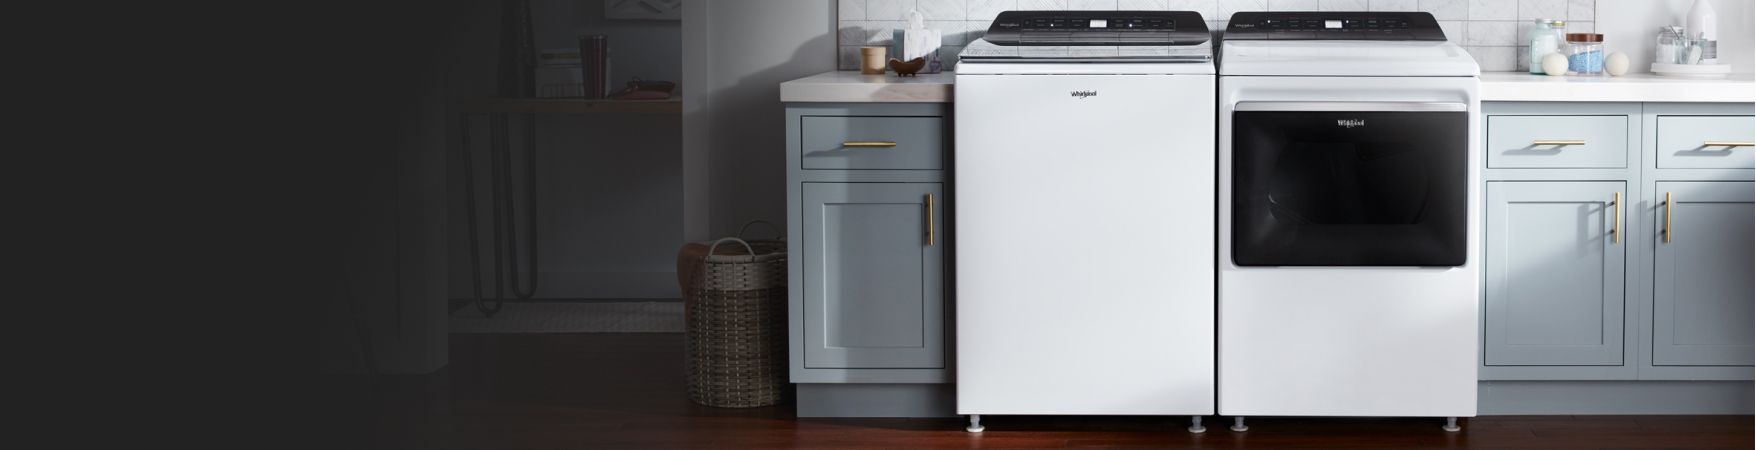 White Whirlpool® Top Load Washer & Dryer next to cabinets